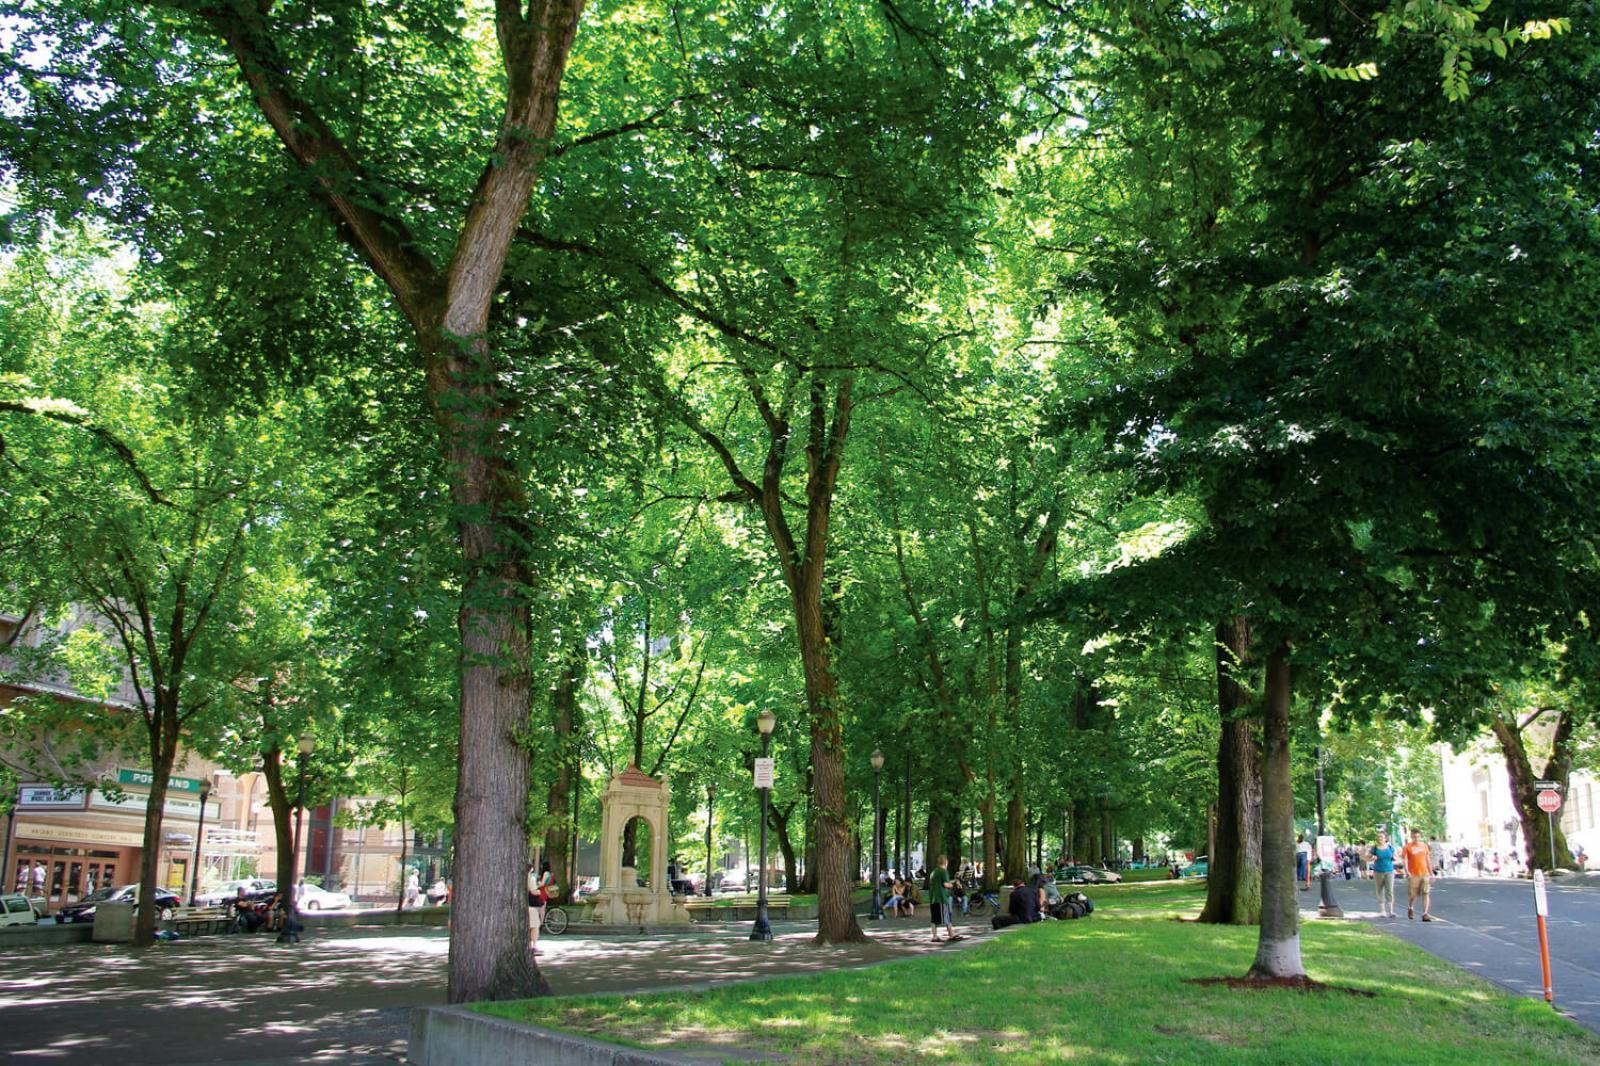  Funds received by LO will help encourage planting trees in urban settings.